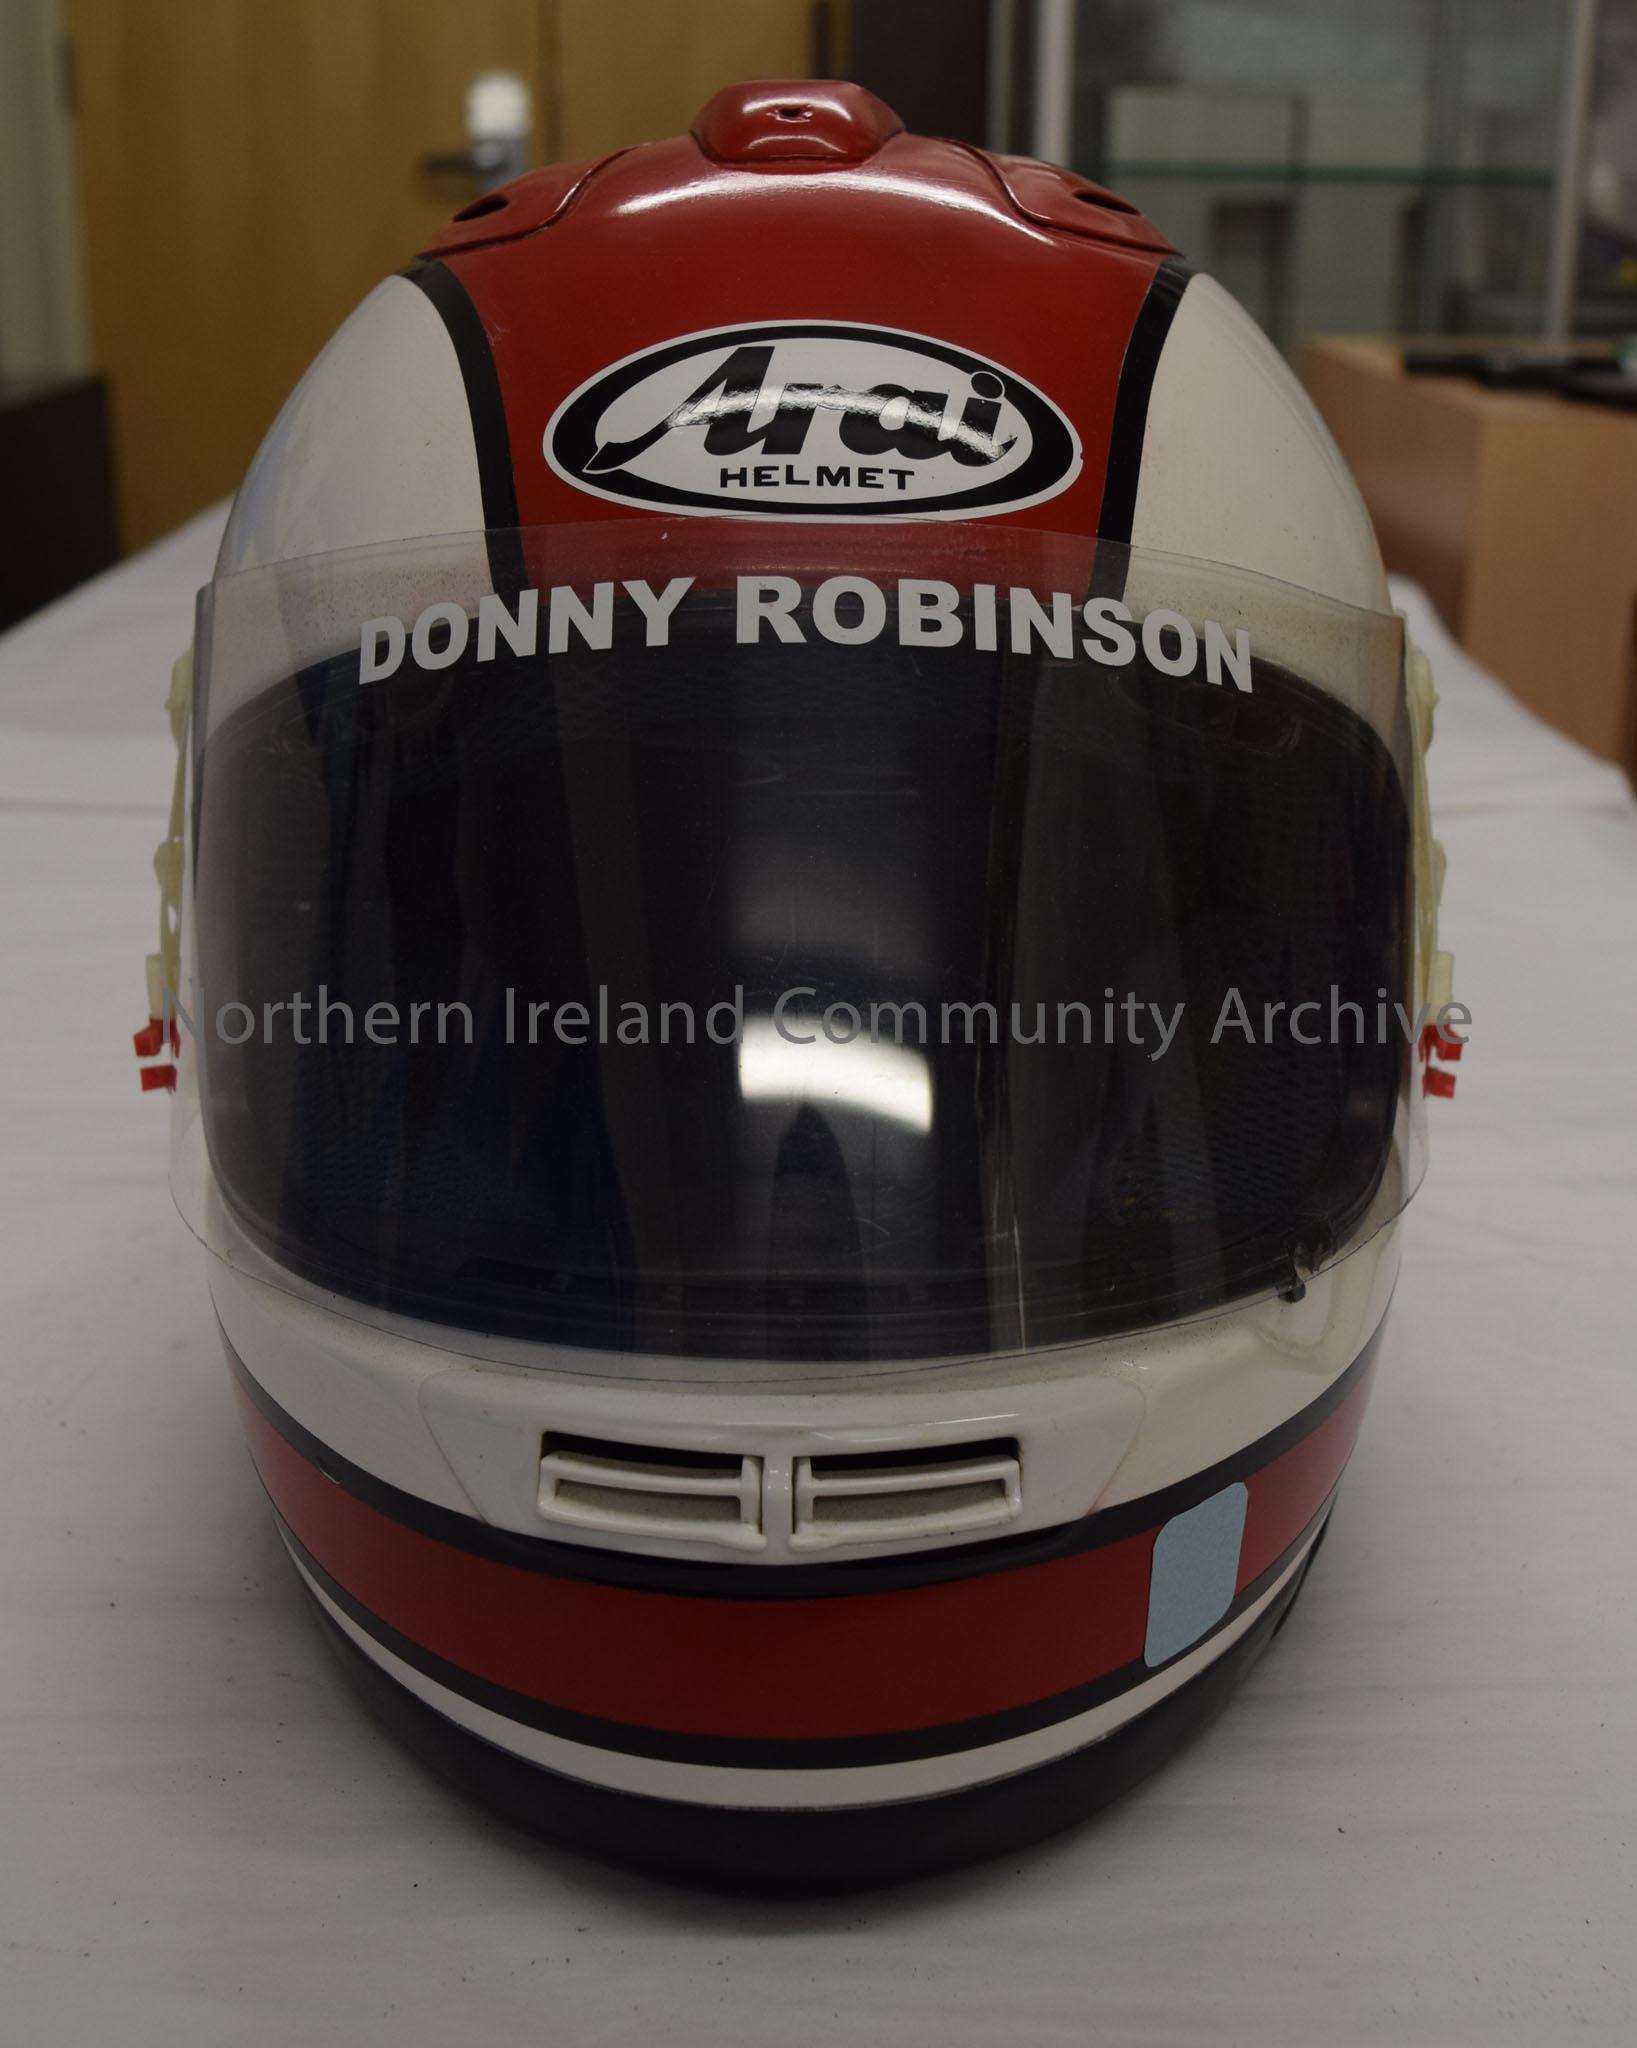 Arai motorcycle helmet belonging to Donny Robinson. White helmet with red stripe with black border running across the top and around the bottom. – 2016.83 (2)